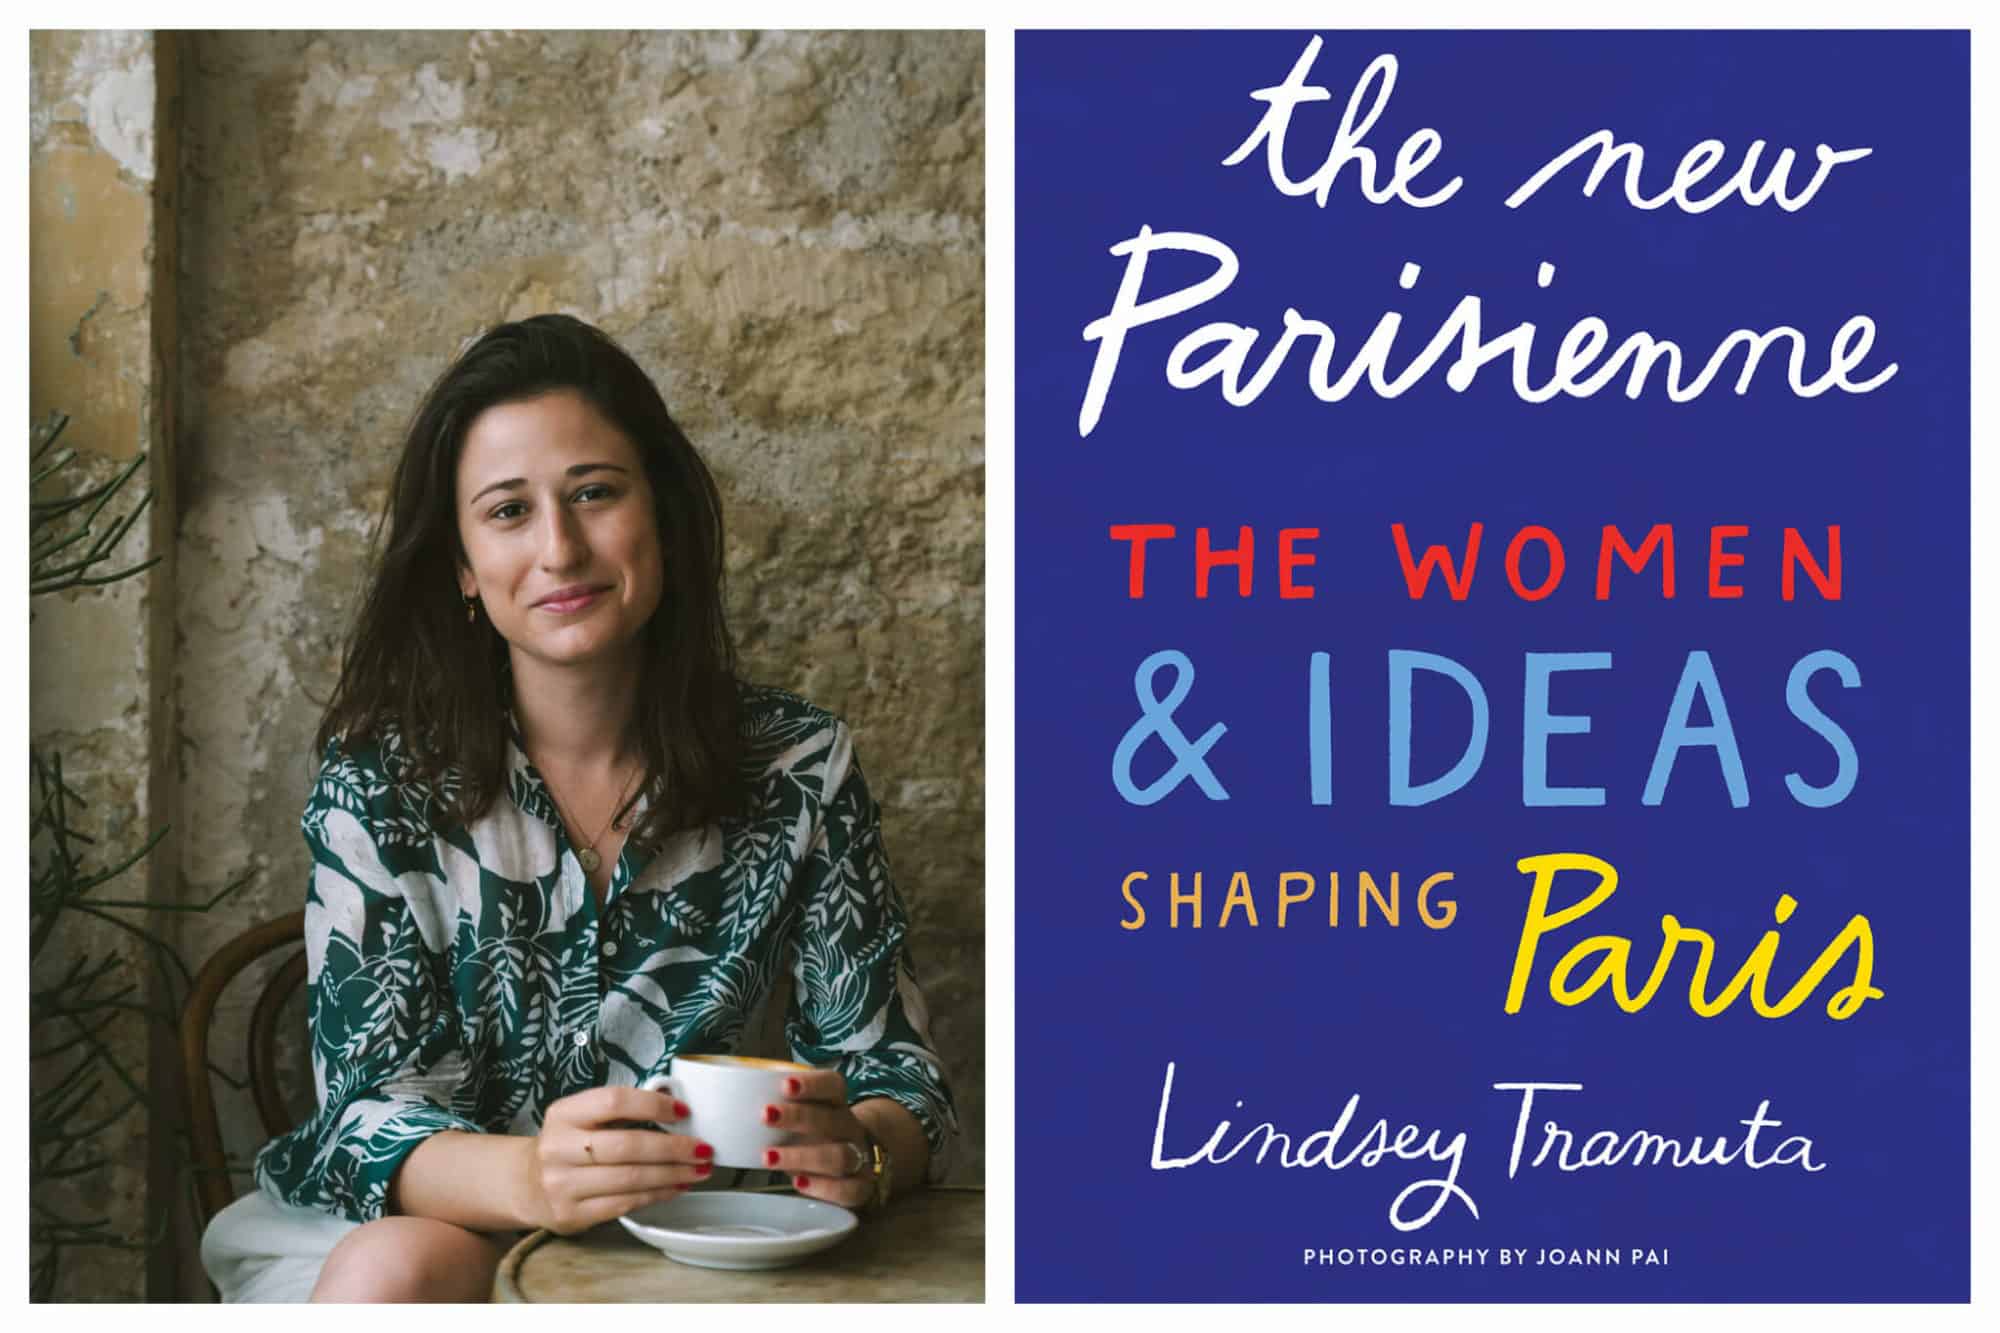 Left: Lindsey Tramuta, author of The New Parisienne: The Women & Ideas Shaping Paris, sits with a cup of coffee while smiling at the camera. 
Right: Cover of Lindsey Tramuta's new book, The New Parisienne: The Women & Ideas Shaping Paris